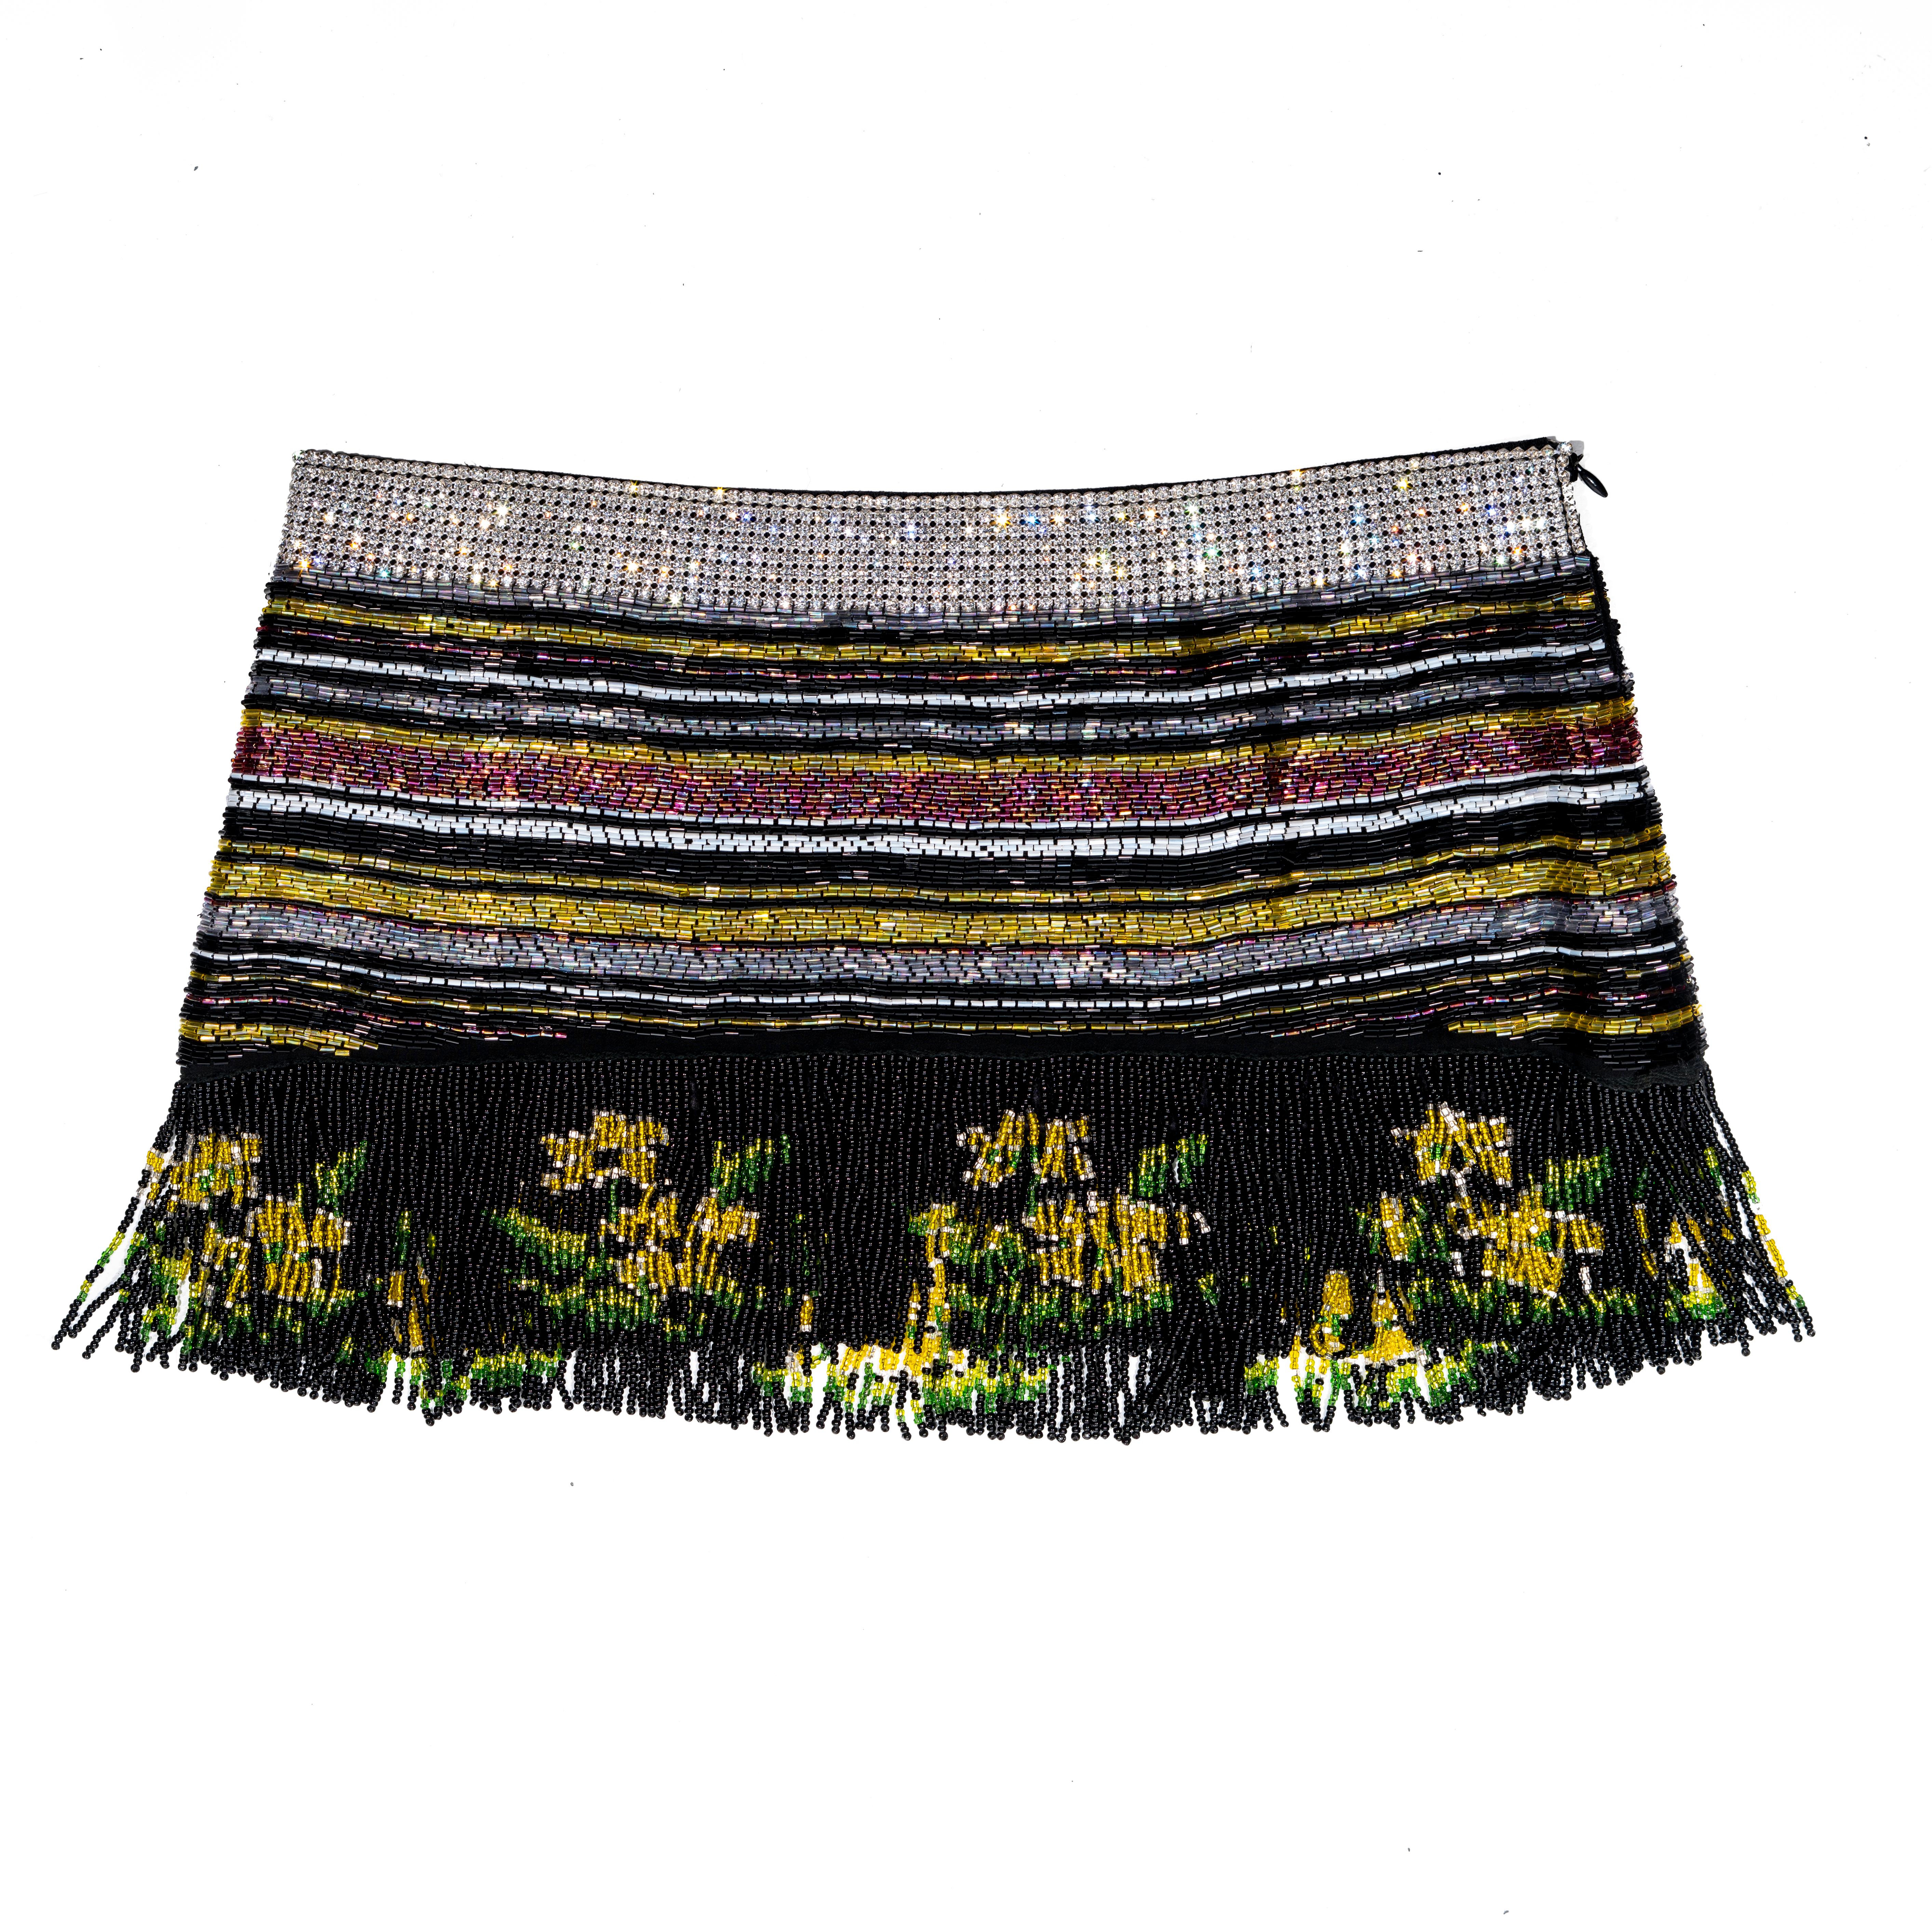 ▪ Dolce & Gabbana beaded mini skirt 
▪ Multicolour horizontally beaded stripes 
▪ Crystal mesh waistband 
▪ Beaded tassel trim with floral pattern 
▪ Low-rise
▪ Silk lining 
▪ IT 42 - FR 38 - UK 10 - US 6
▪ Spring-Summer 2000
▪ 100% Silk
▪ Made in